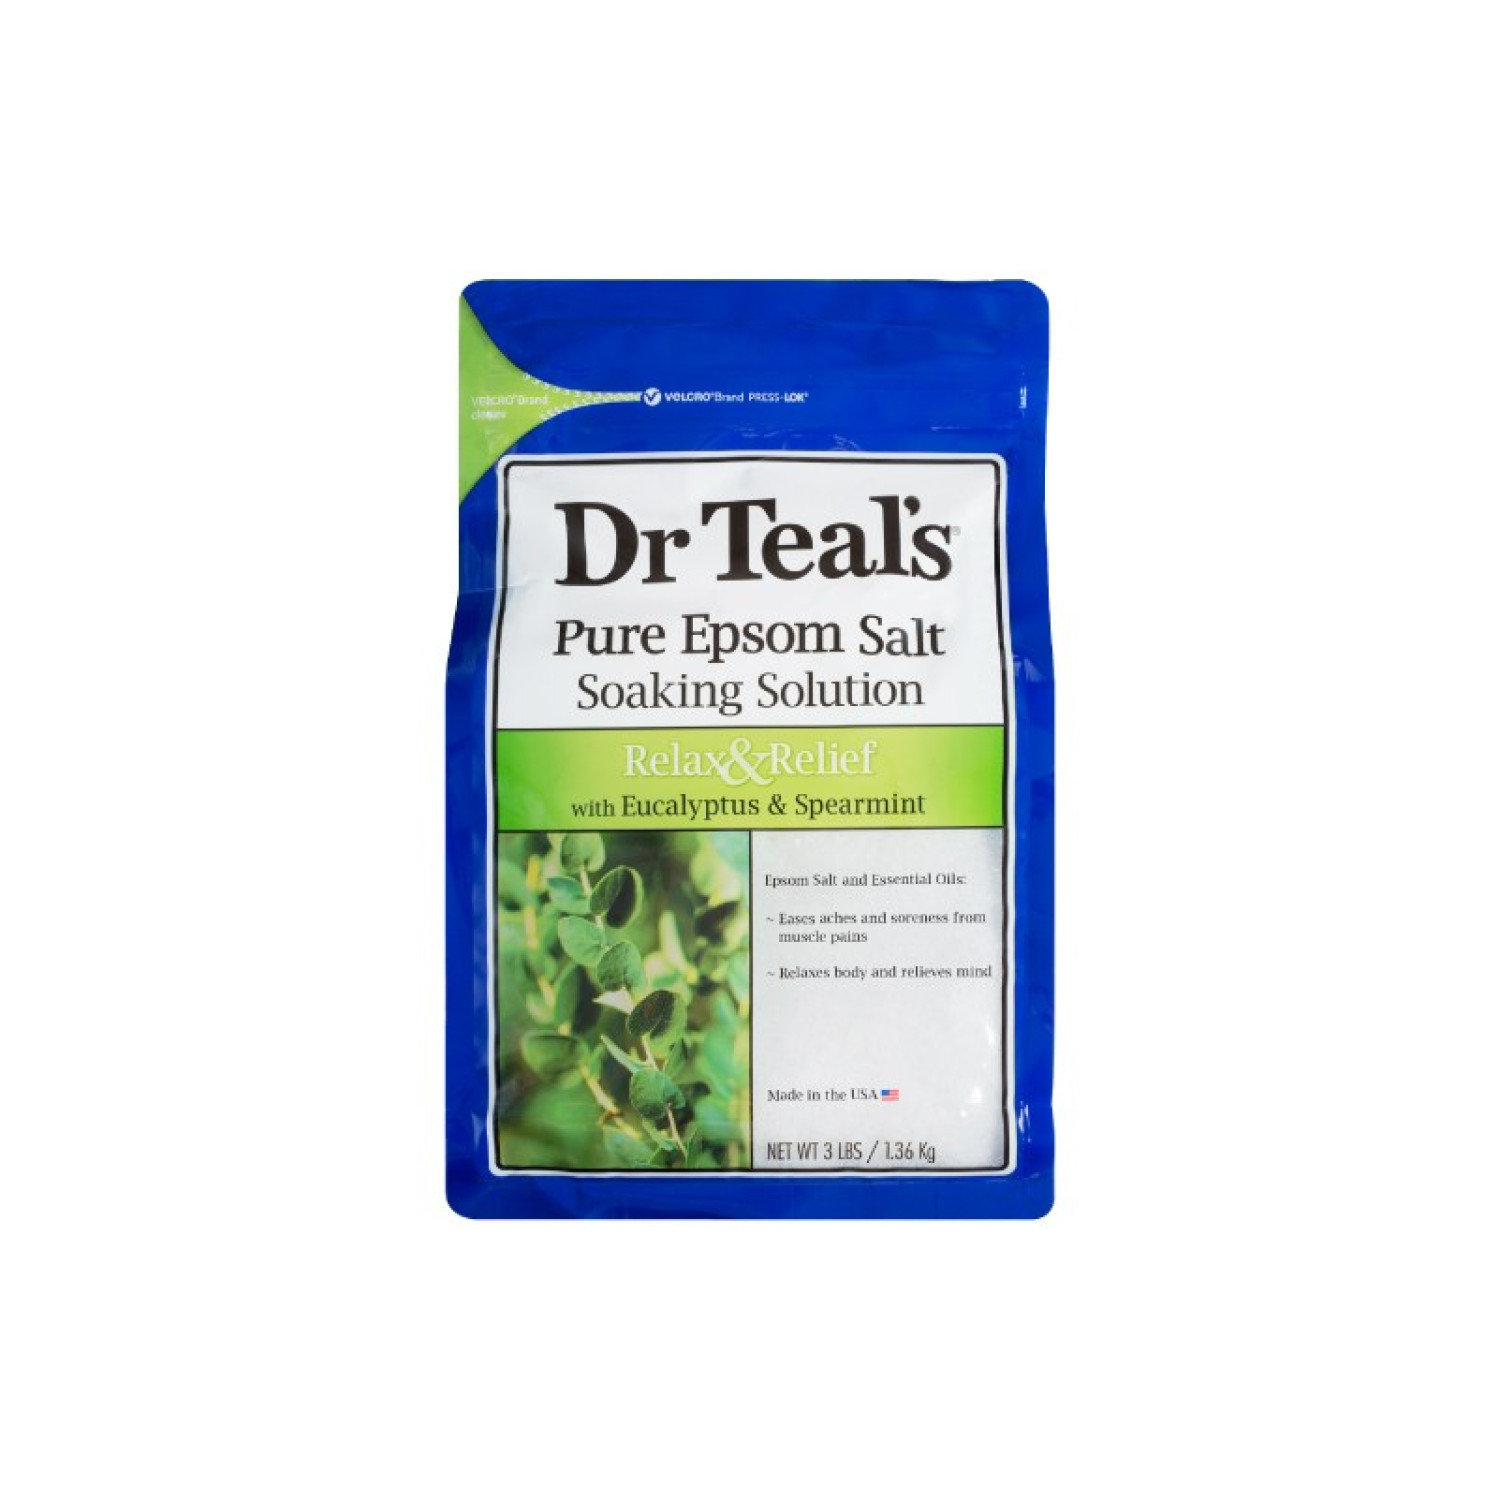 Dr Teal's Dr Teal’s Pure Epsom Salt Soaking Solution Relax & Purify with Eucalyptus & Spearmint